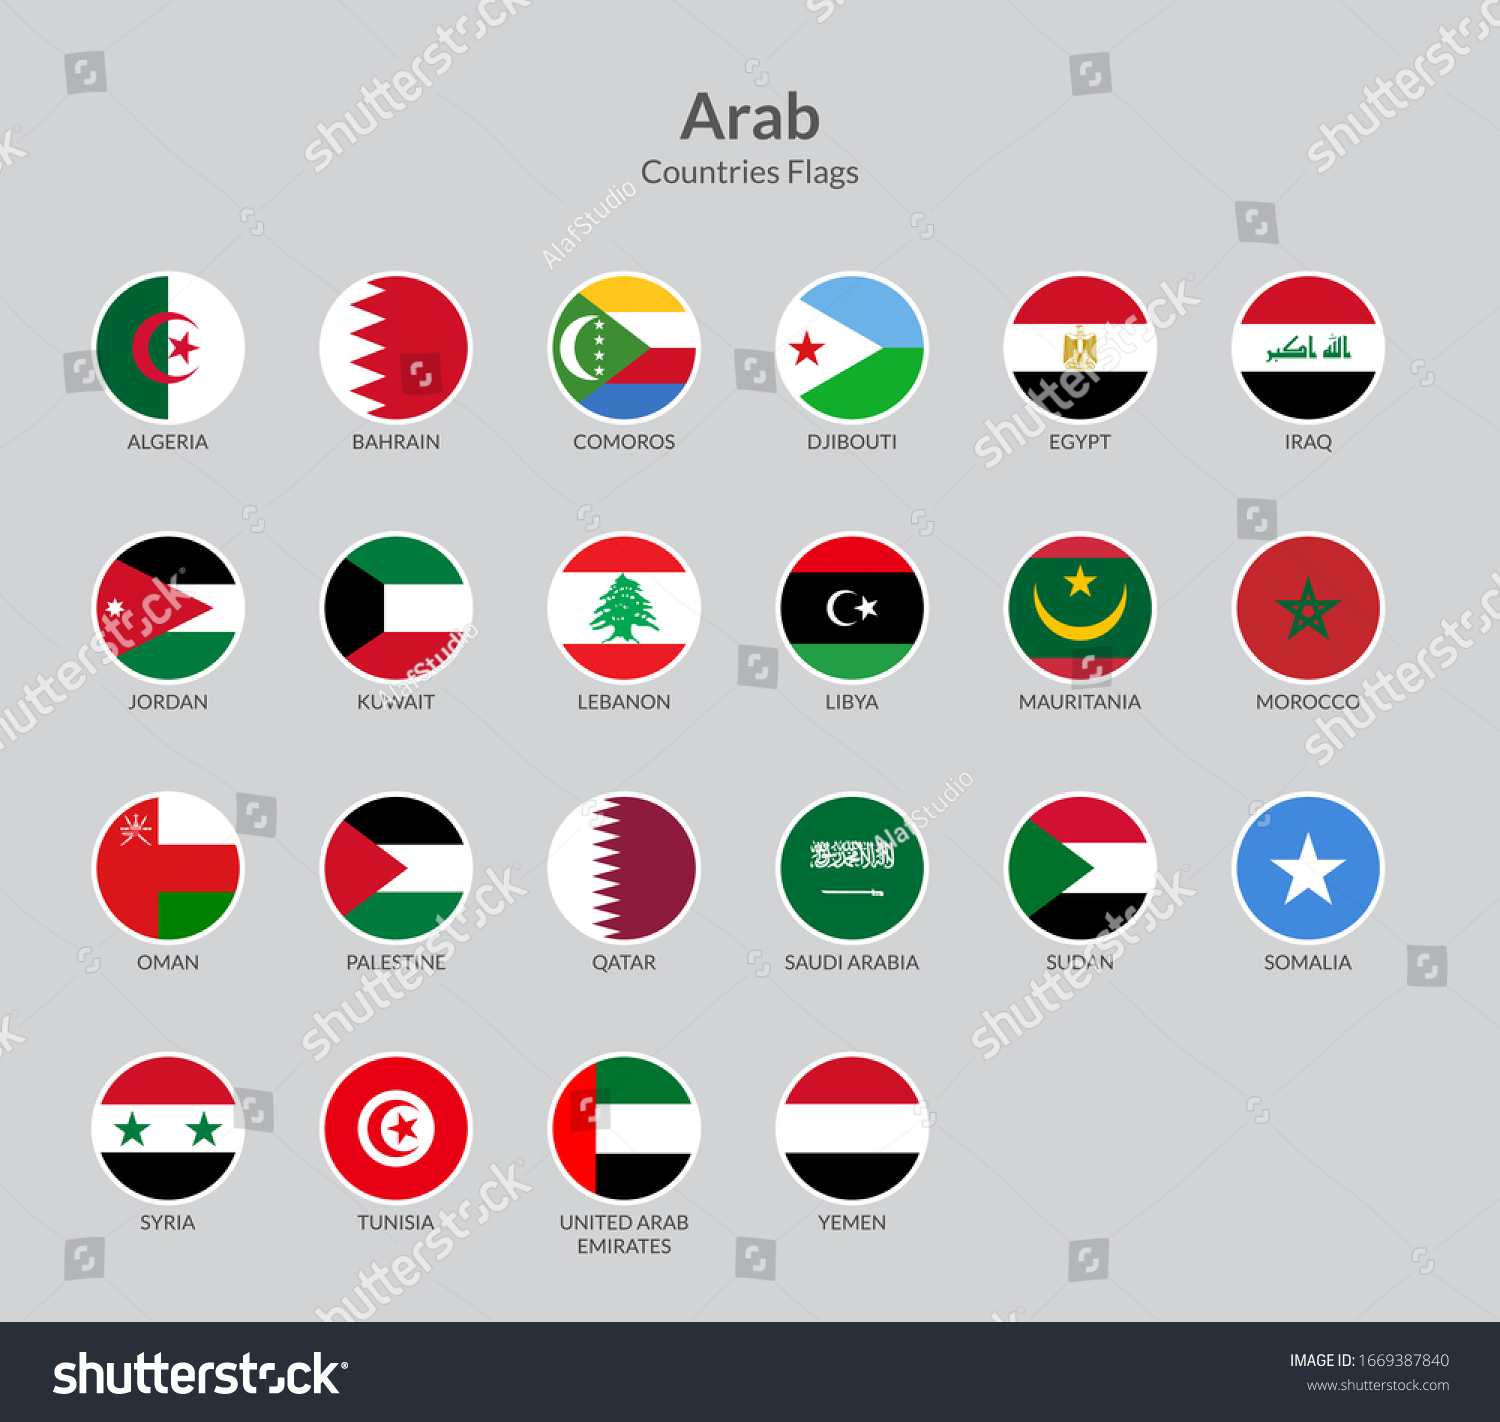 107,439 Arab country flags Images, Stock Photos & Vectors | Shutterstock